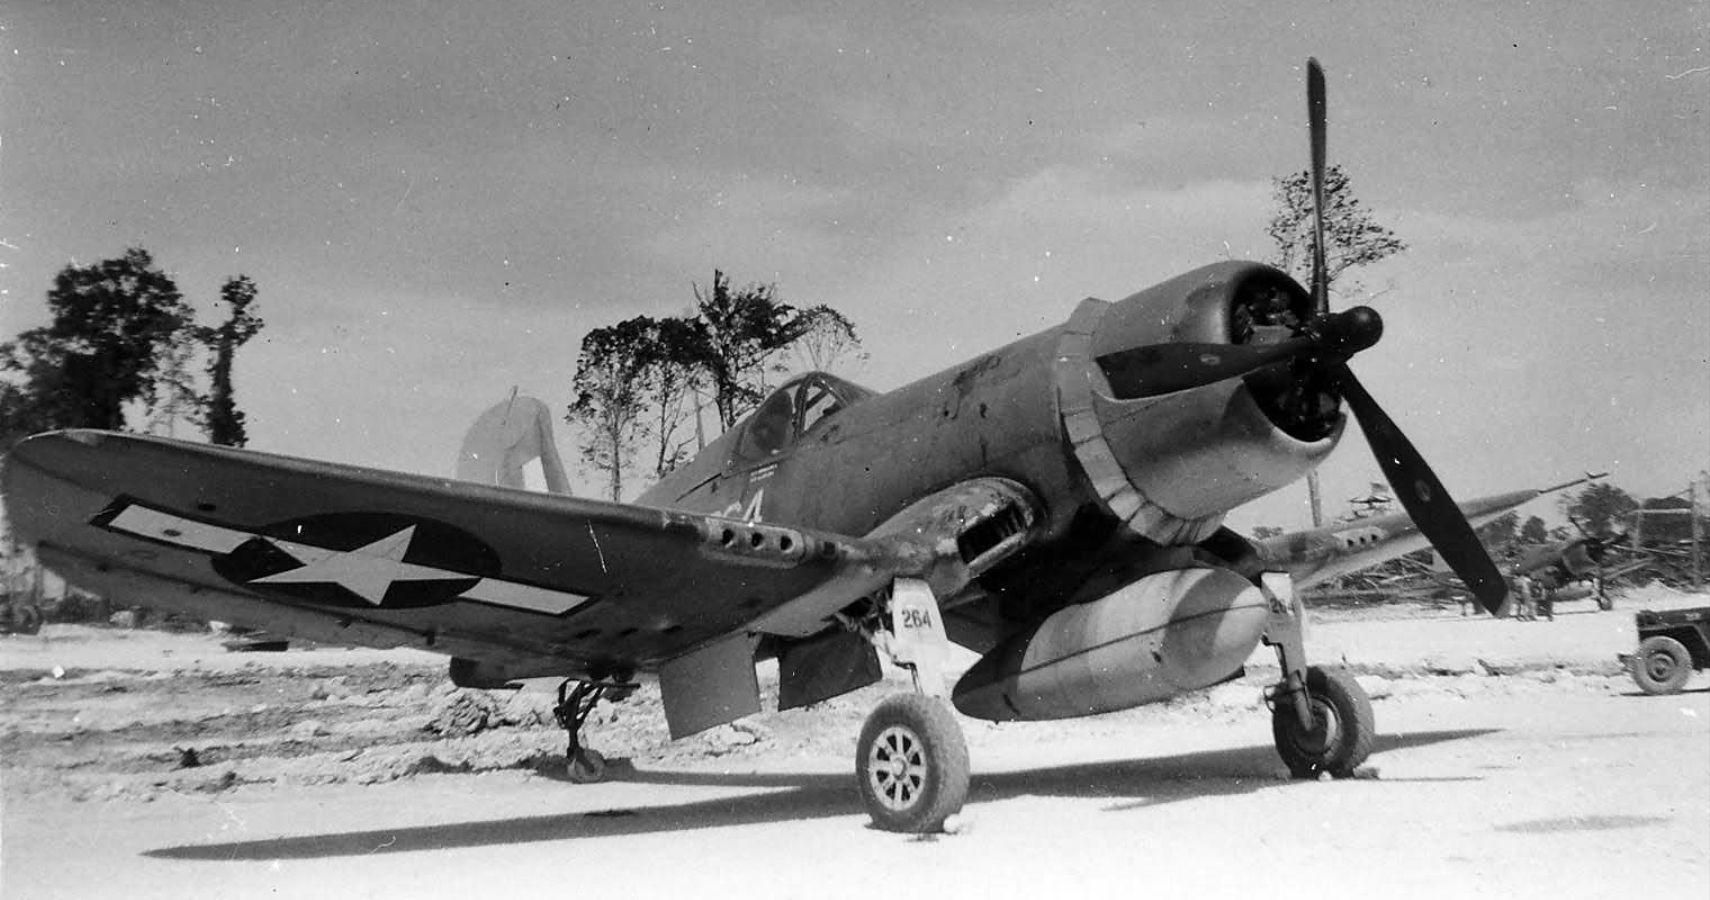 This Is What Made The F4U Corsair WW2's Best Naval Fighter